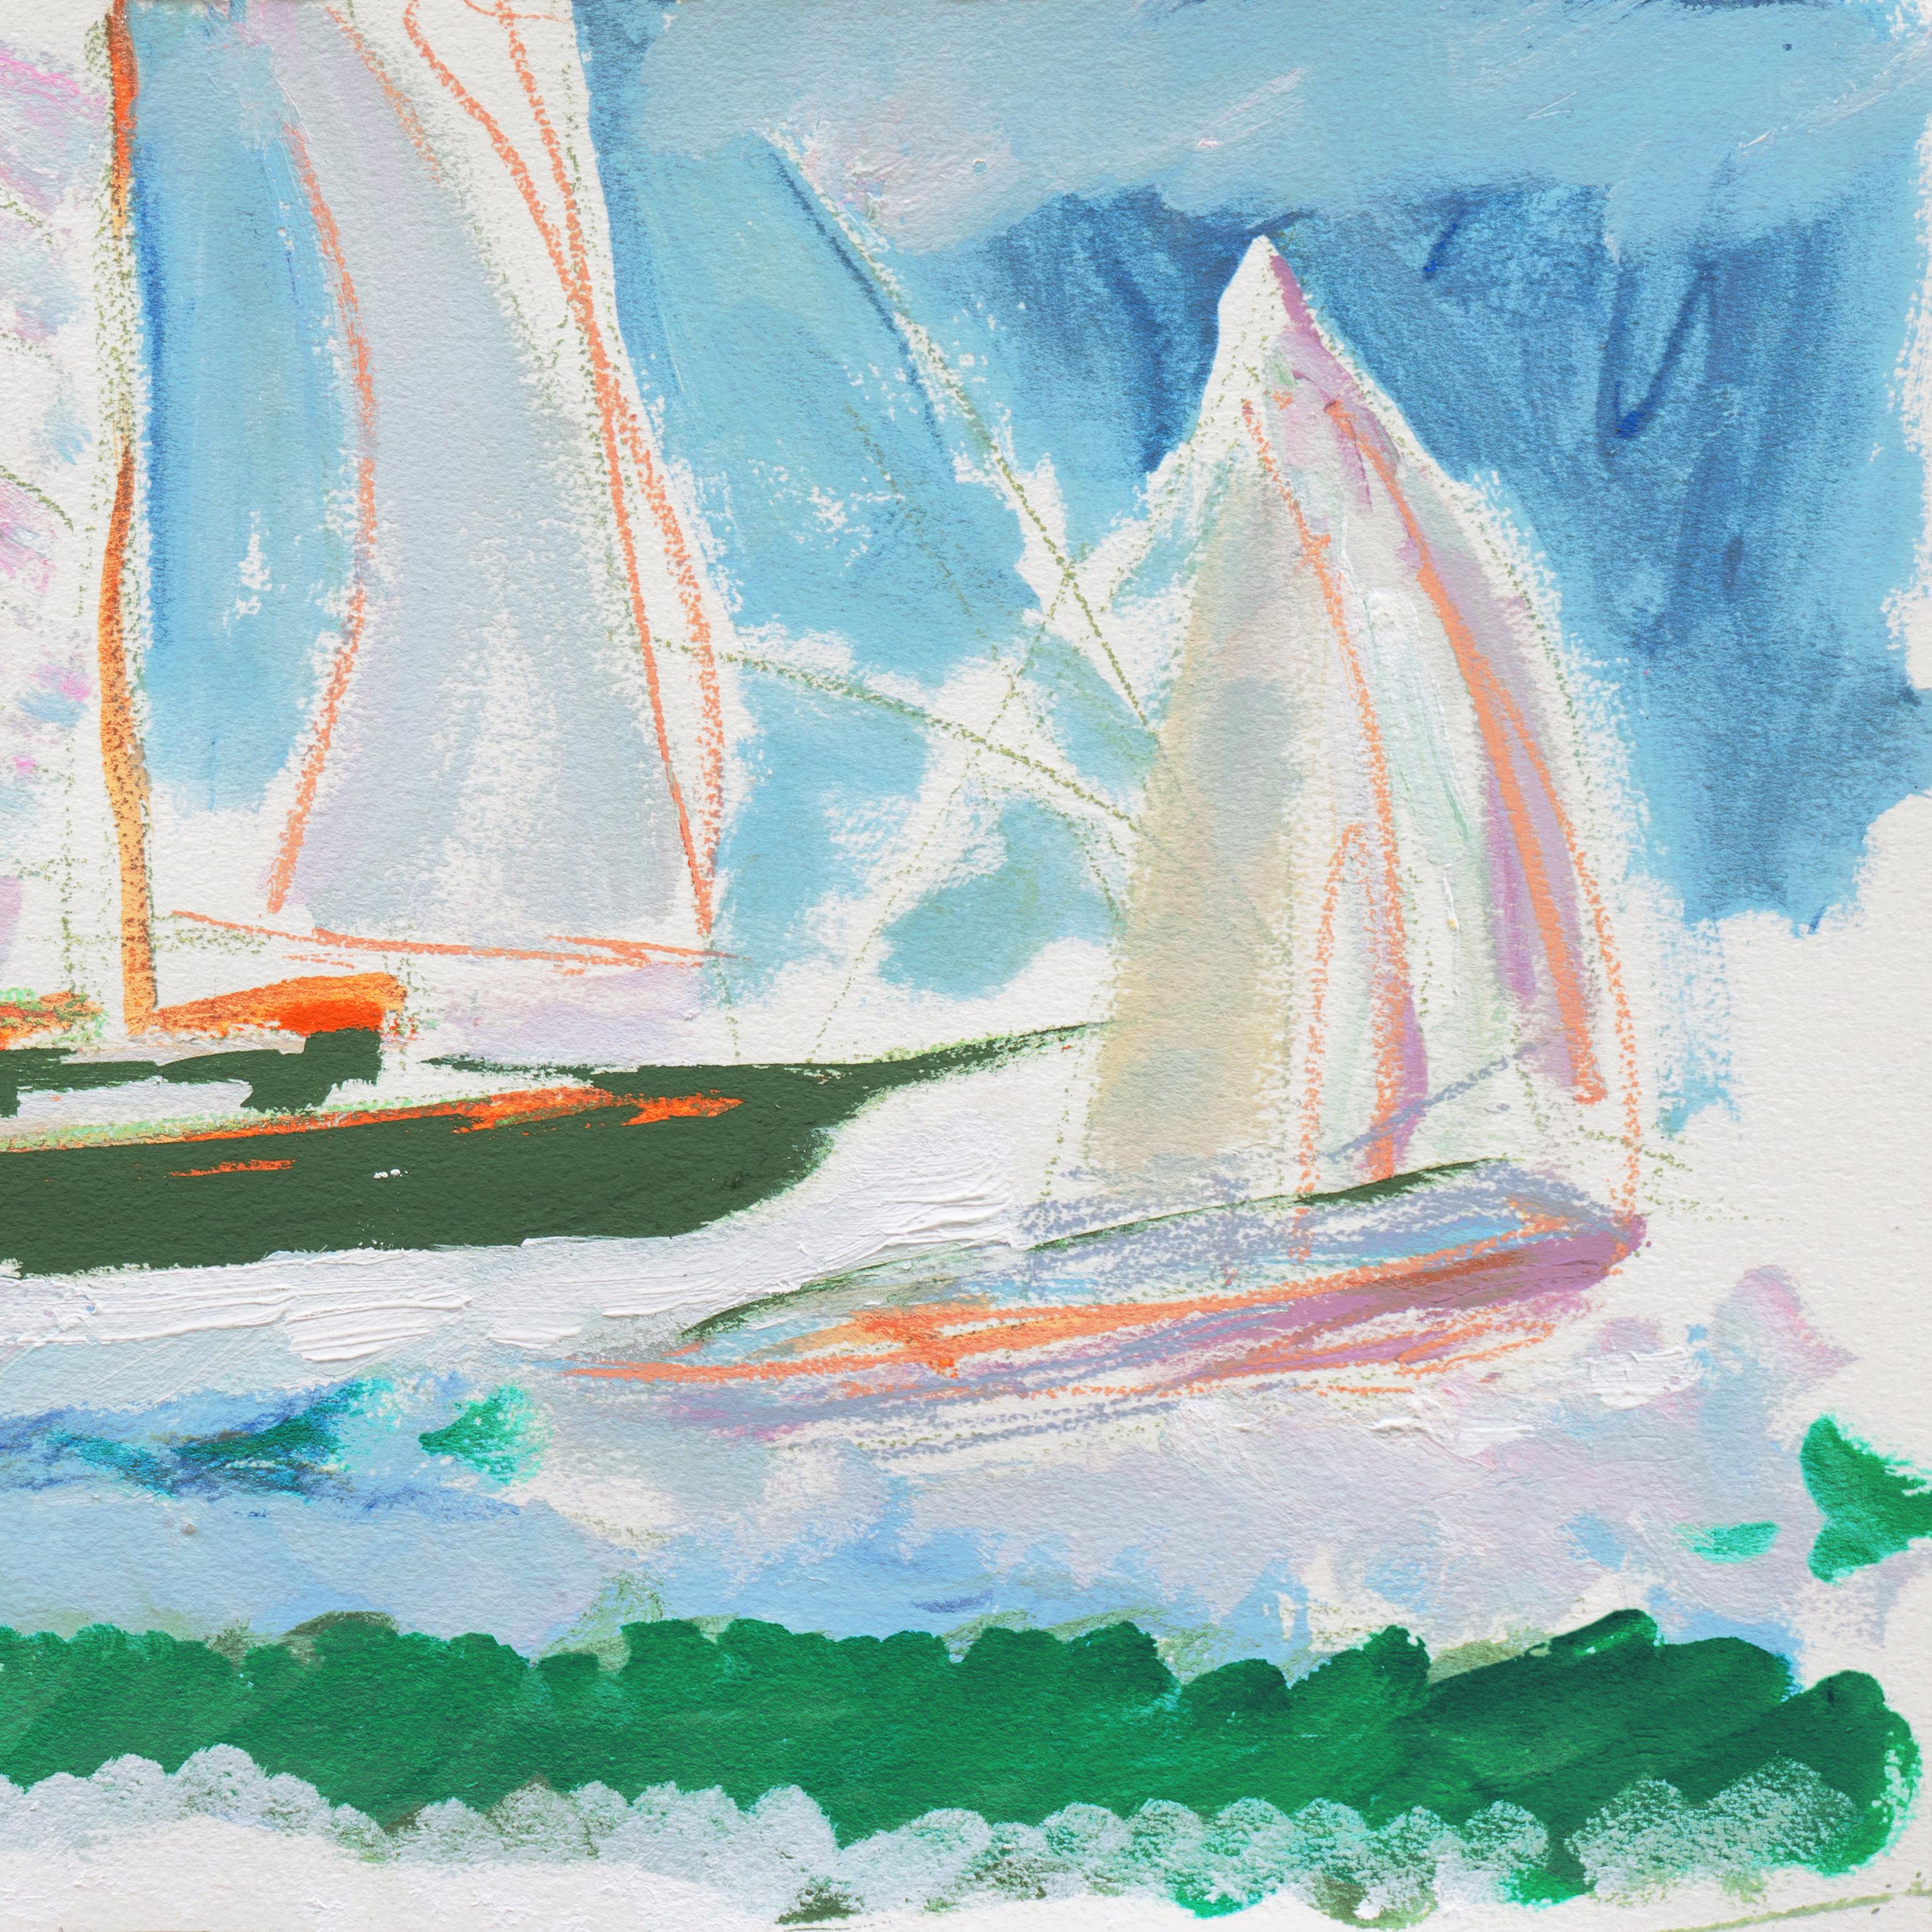 'Sailing Boats off Monterey', California Expressionist, Stanford, Carmel - Blue Landscape Painting by Robert Canete